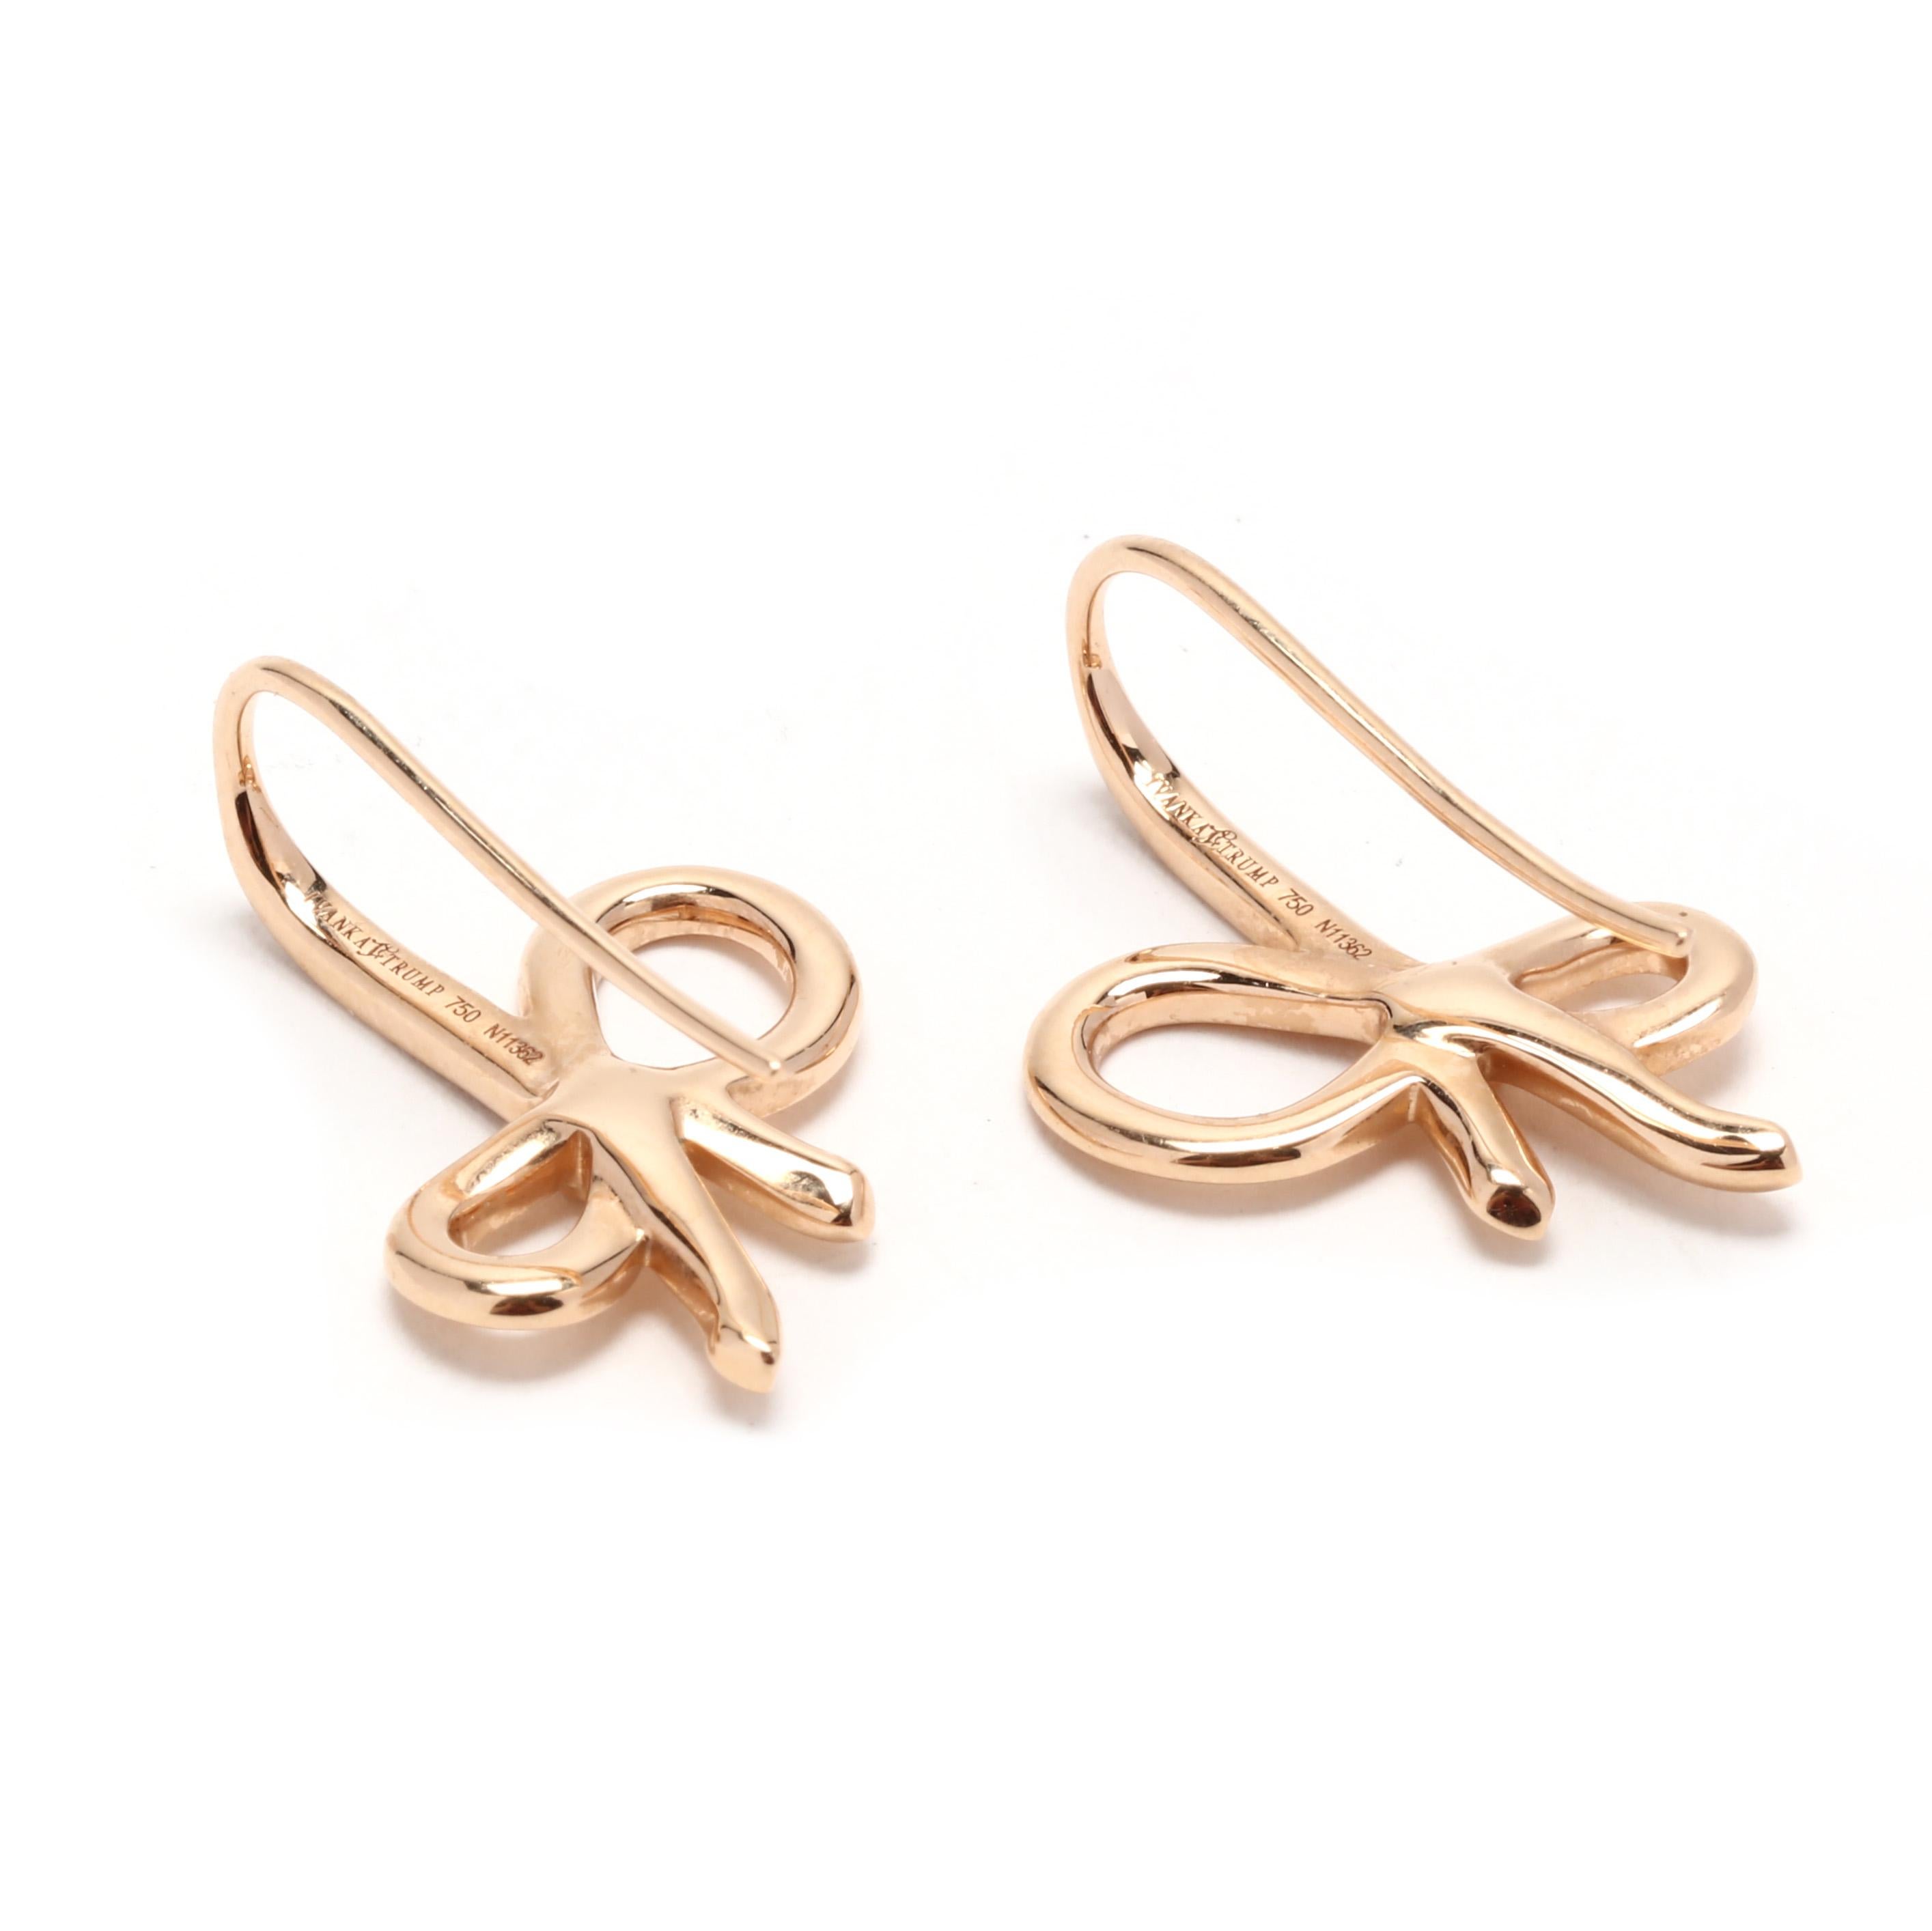 A pair of 18 karat rose gold diamond bow drop earrings by Ivanka Trump. These everyday earrings features a tilted bow motif set with round brilliant cut diamonds weighing approximately .10 total carats and with ear wires.

Stones: 
- diamonds
-